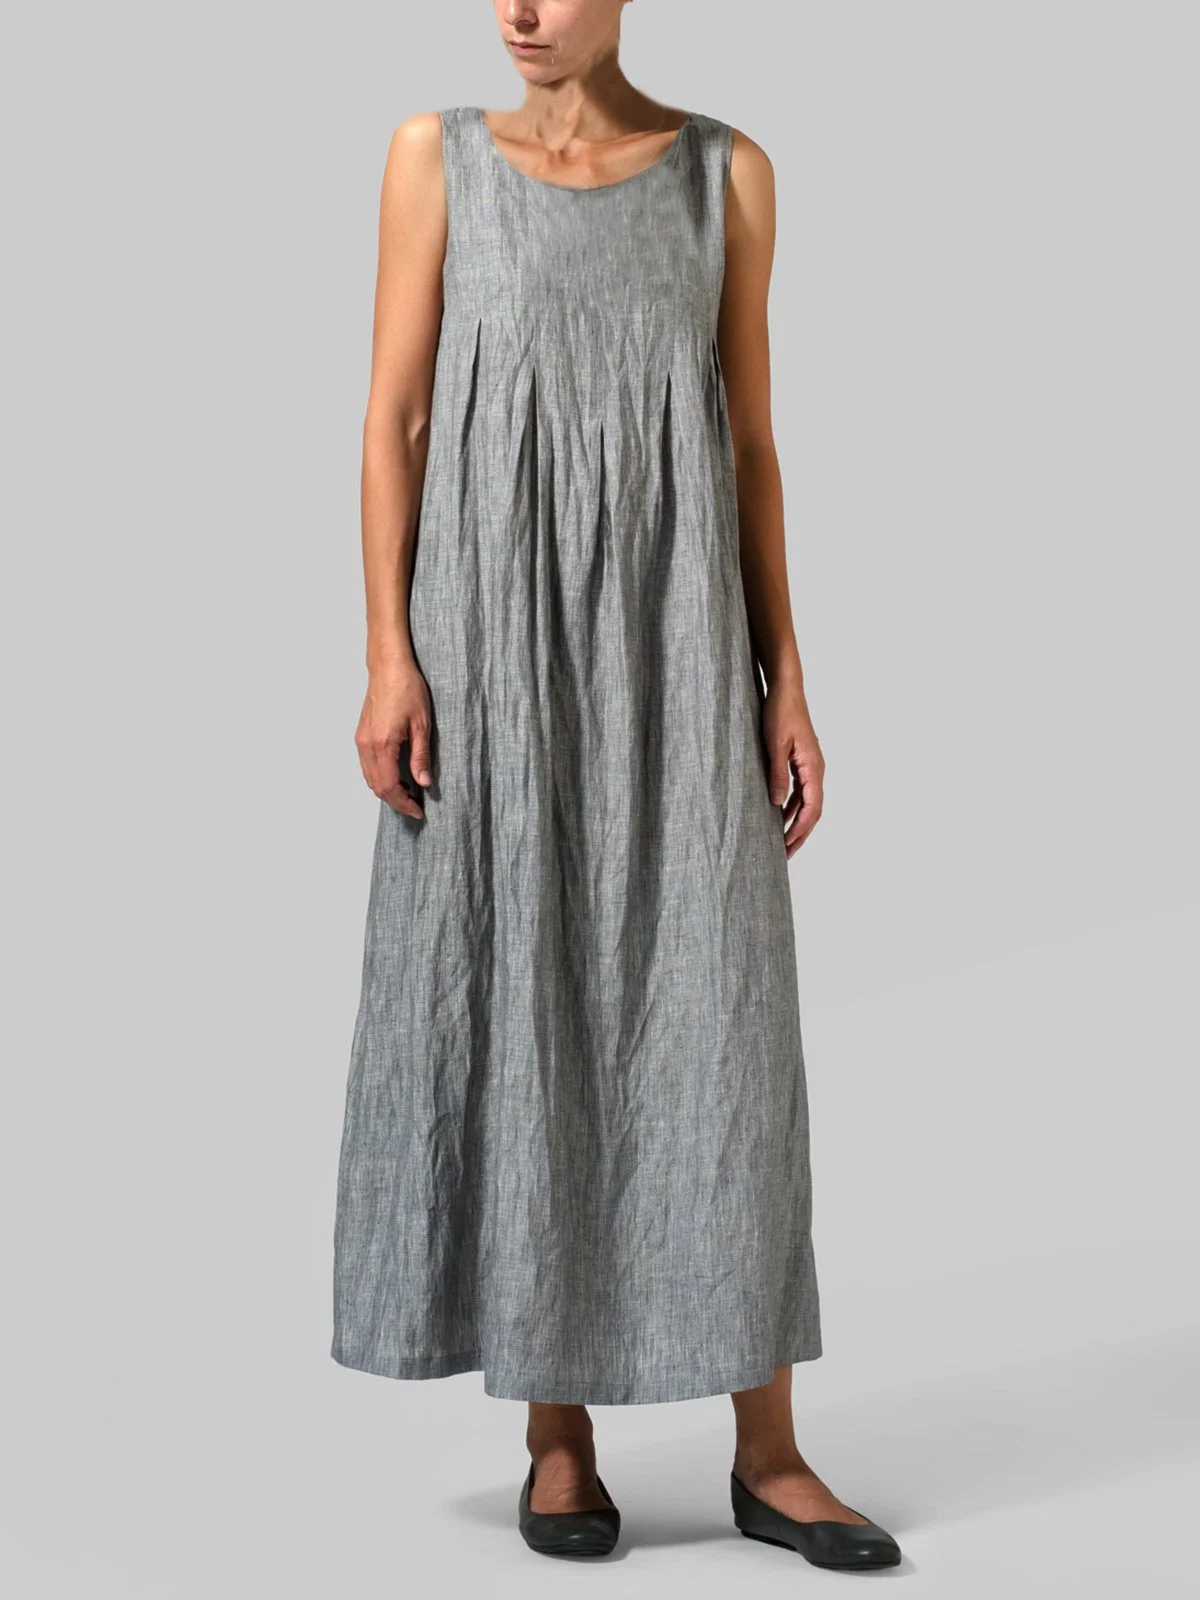 Casual Round Neck Weaving Dress | outlet.noracora